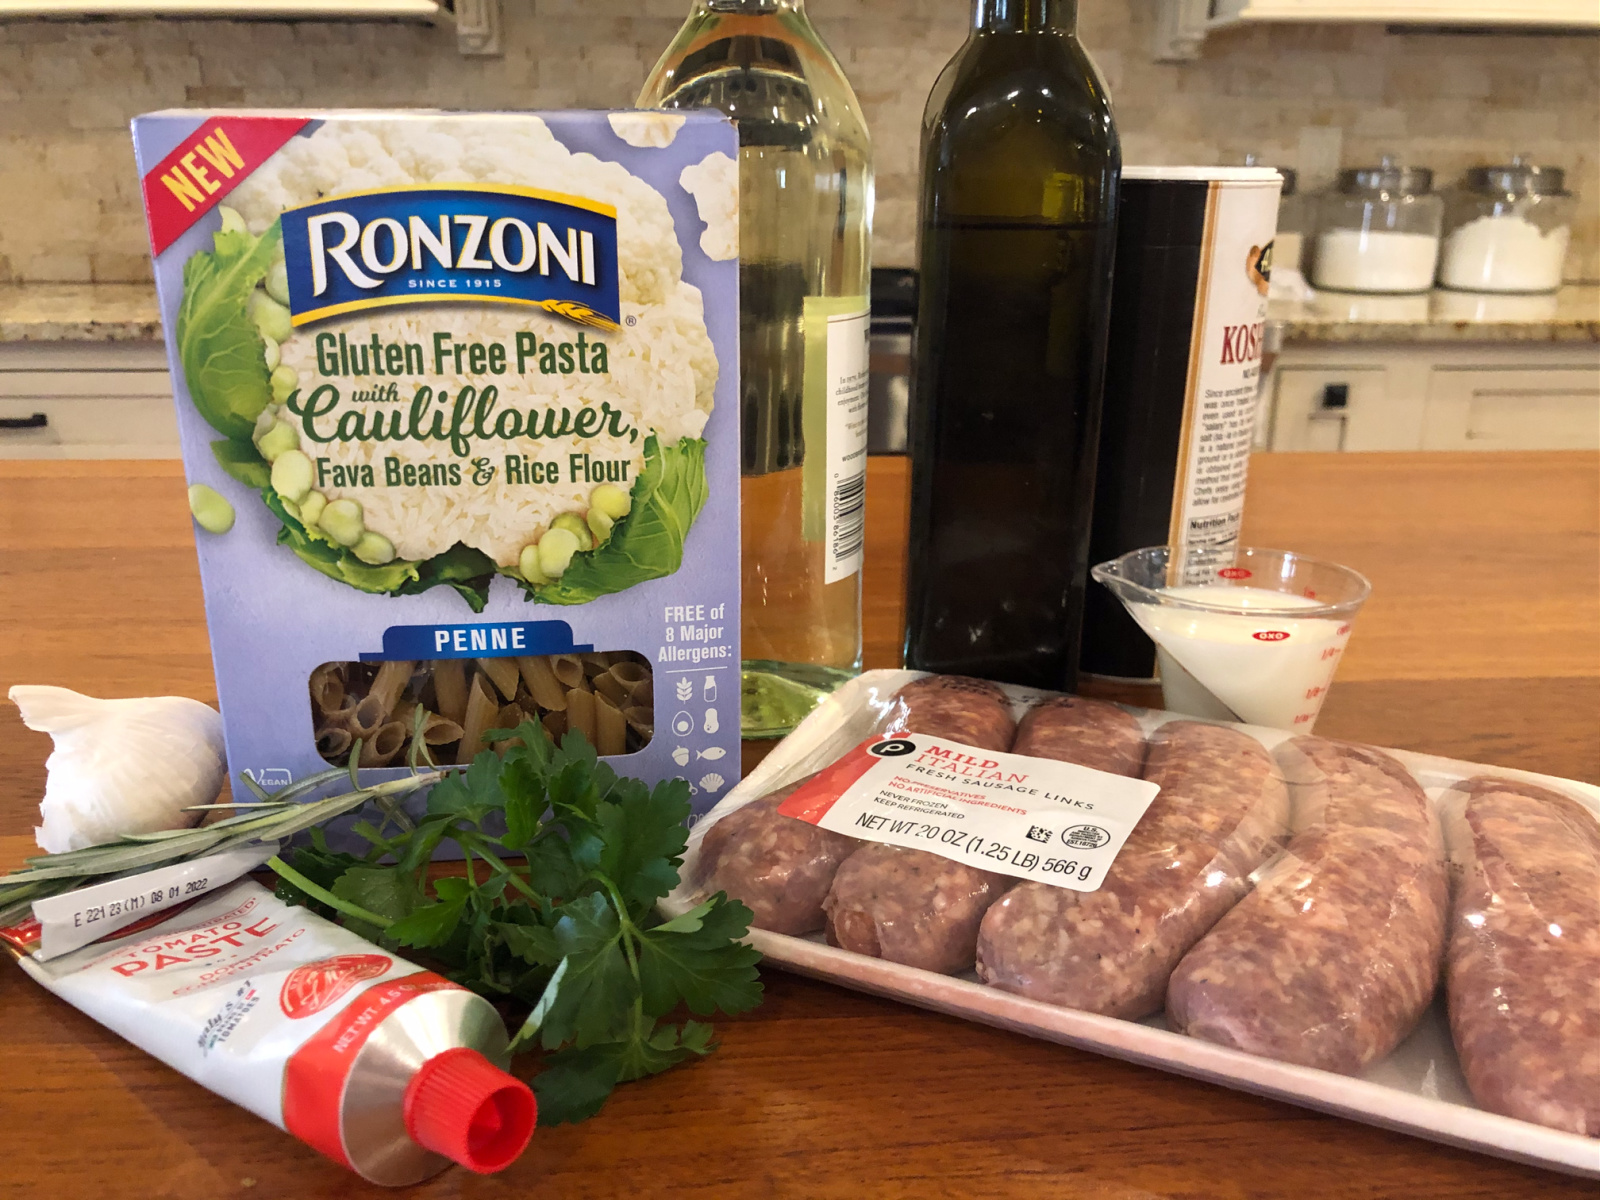 Save On Ronzoni At Publix & Try This Recipe For Ronzoni Cauliflower Penne with Spicy Sausage Ragu on I Heart Publix